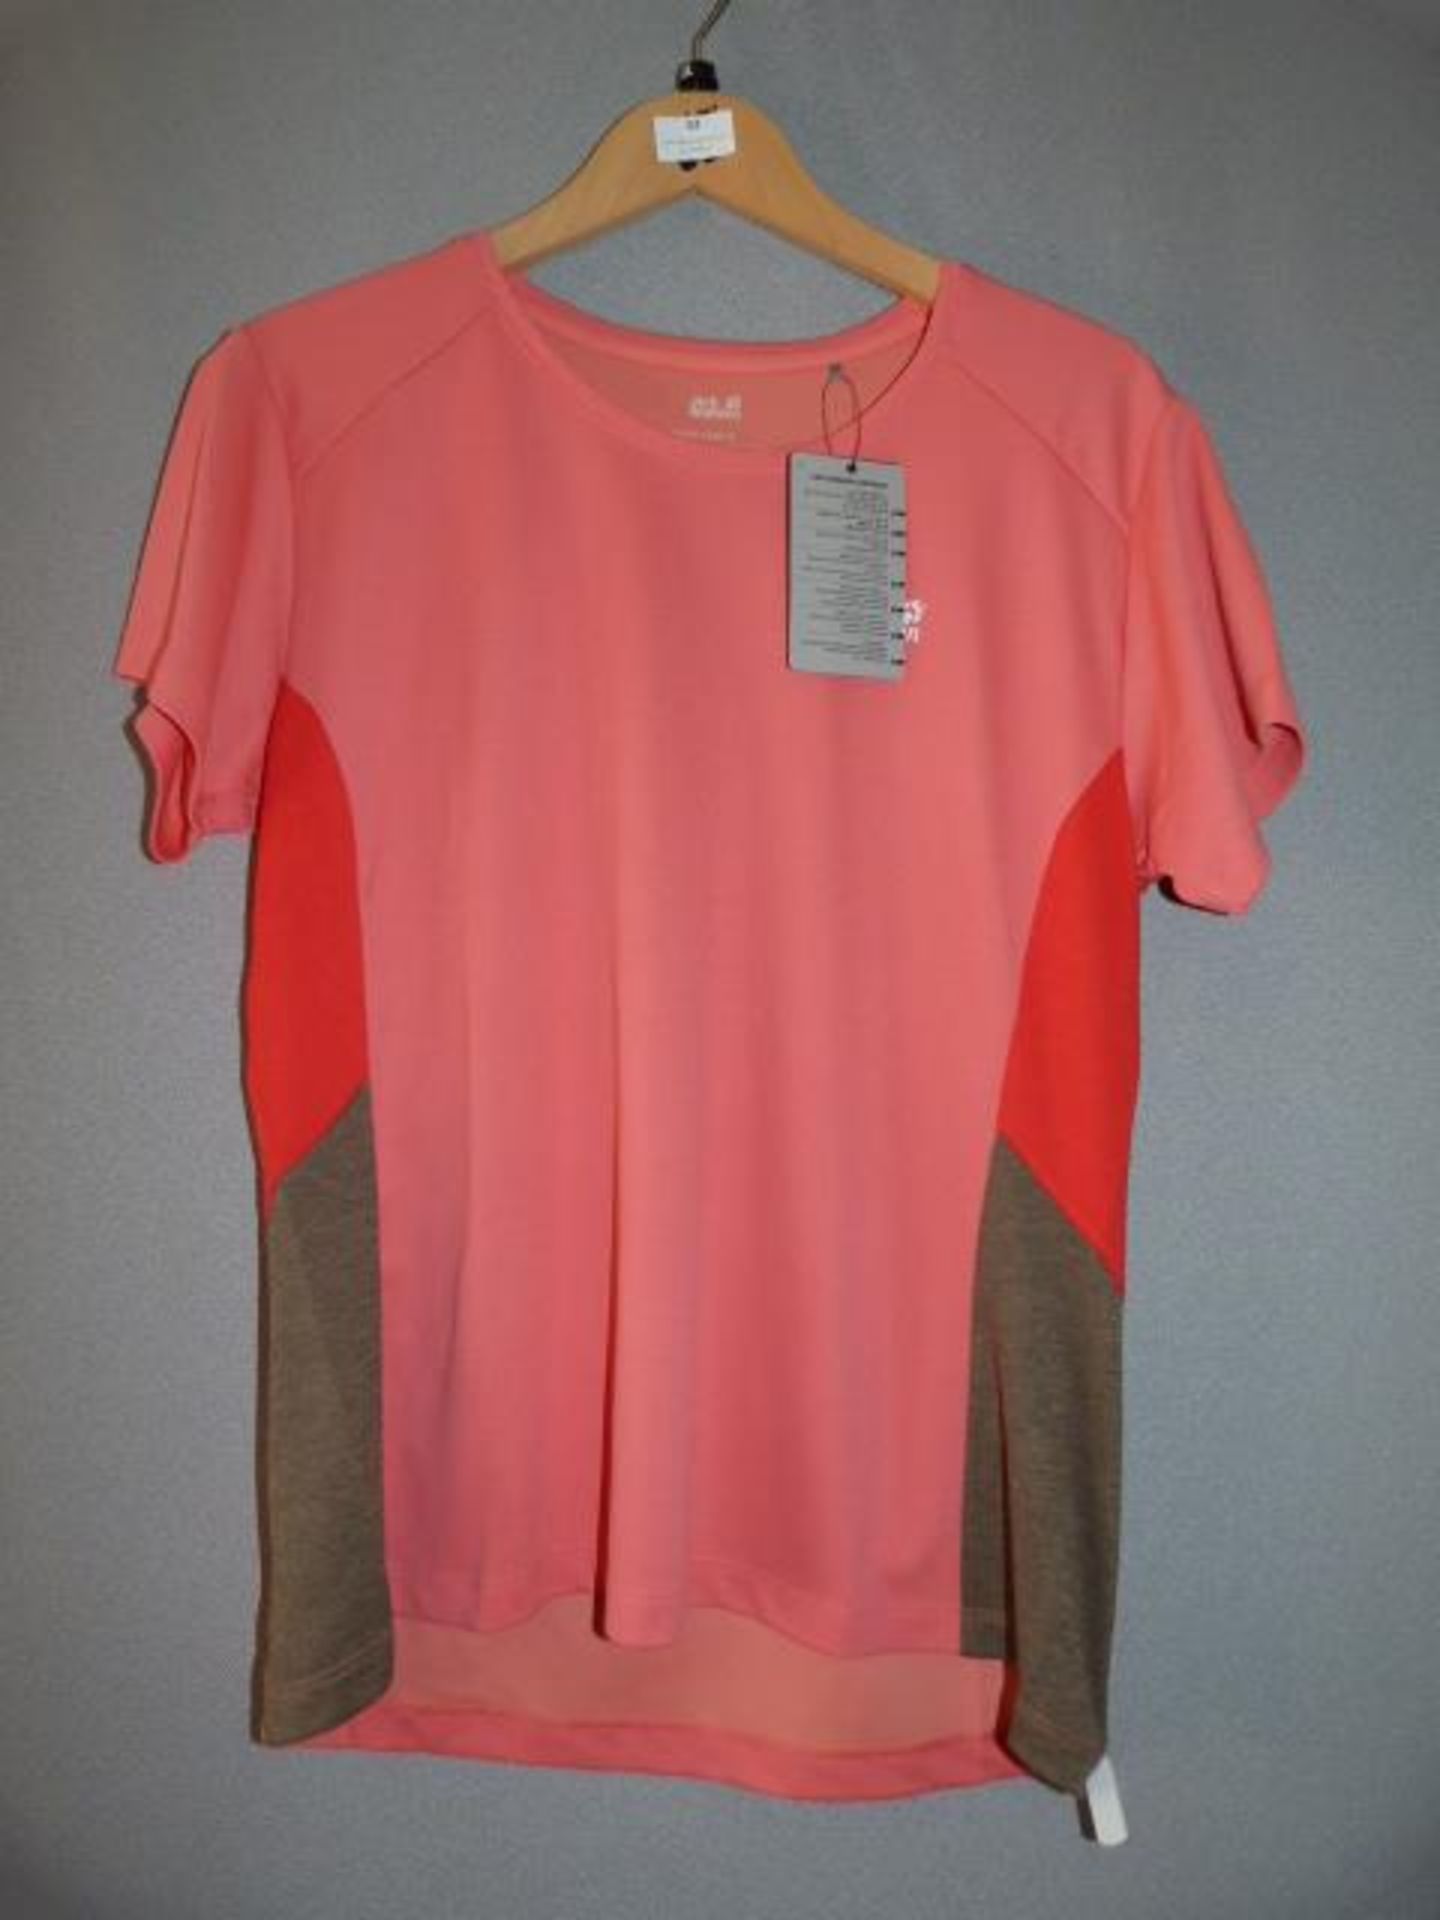 *Narrows Sky Top in Coral Pink Size: XL